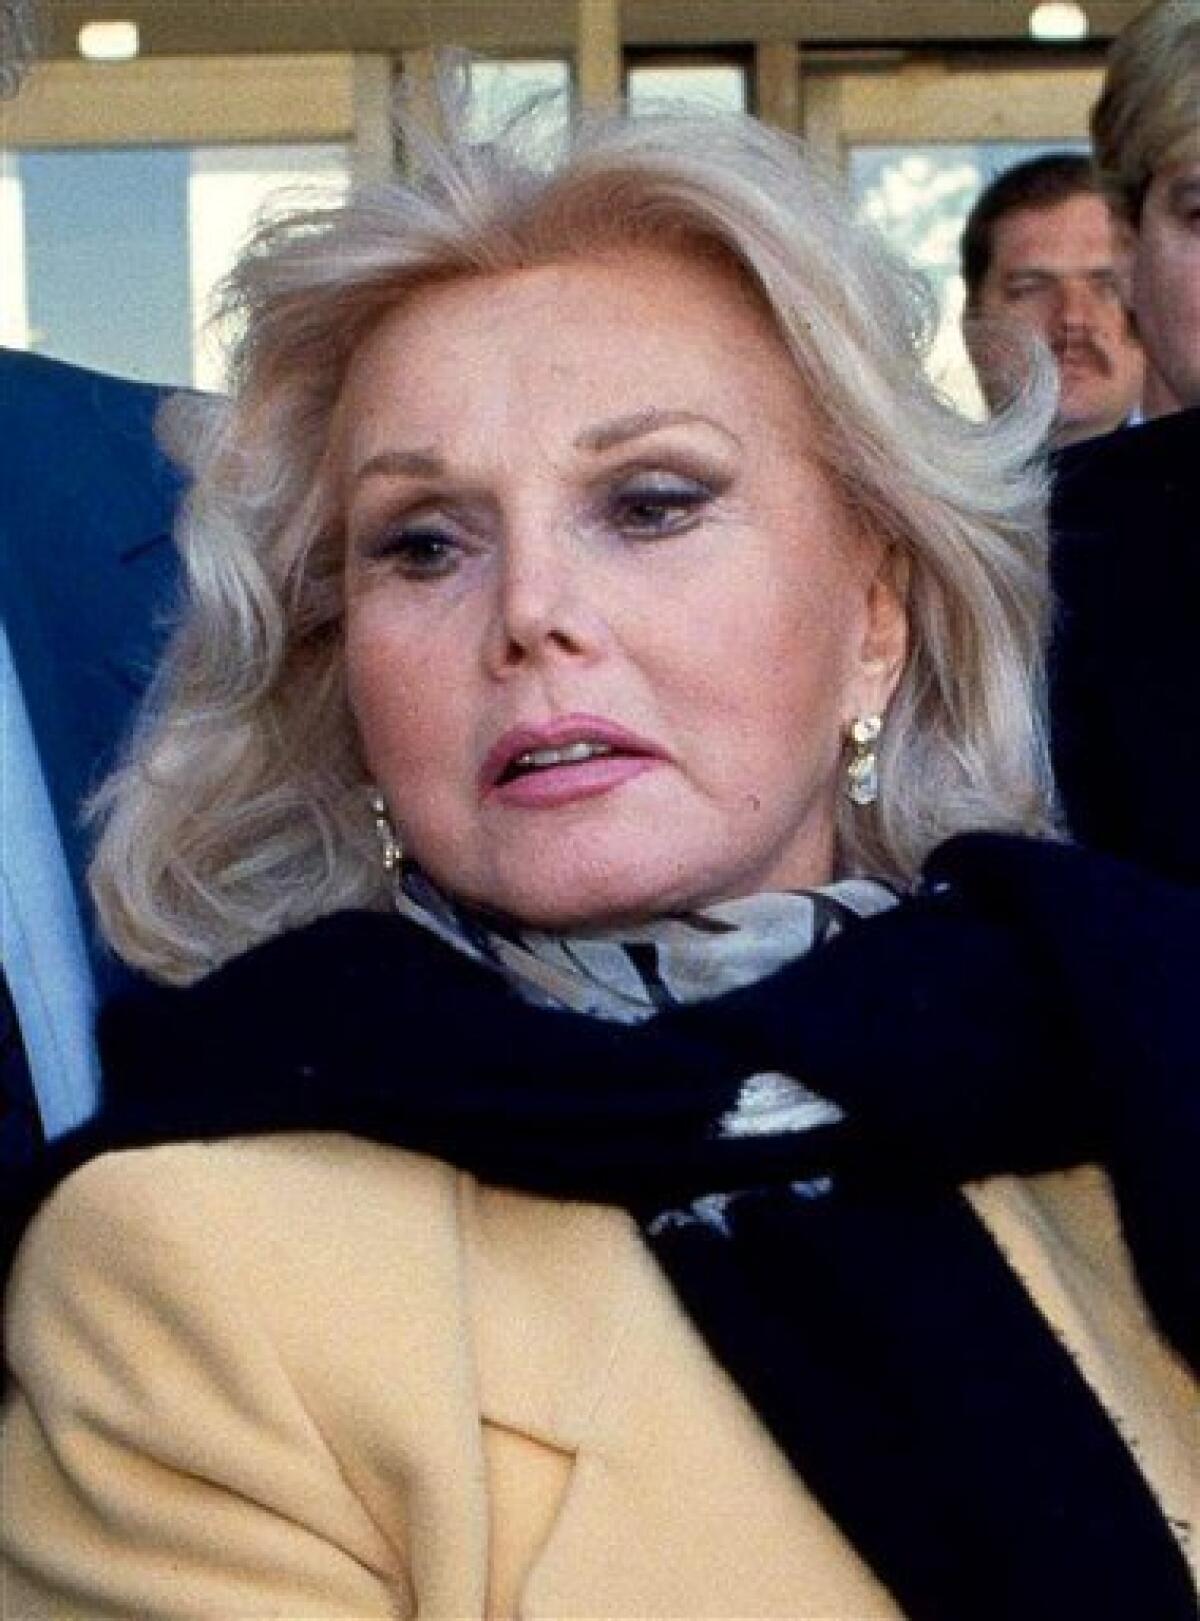 FILE - In this Jan. 27, 1993 file photo, actress Zsa Zsa Gabor is shown in Midland, Texas. Constance Francesca Hilton , the daughter of Gabor, is asking a Los Angeles court to place her mother in a conservatorship that will independently control the ailing glamor queen's medical care and financial needs. (AP Photo/Curt Wilcott, File)